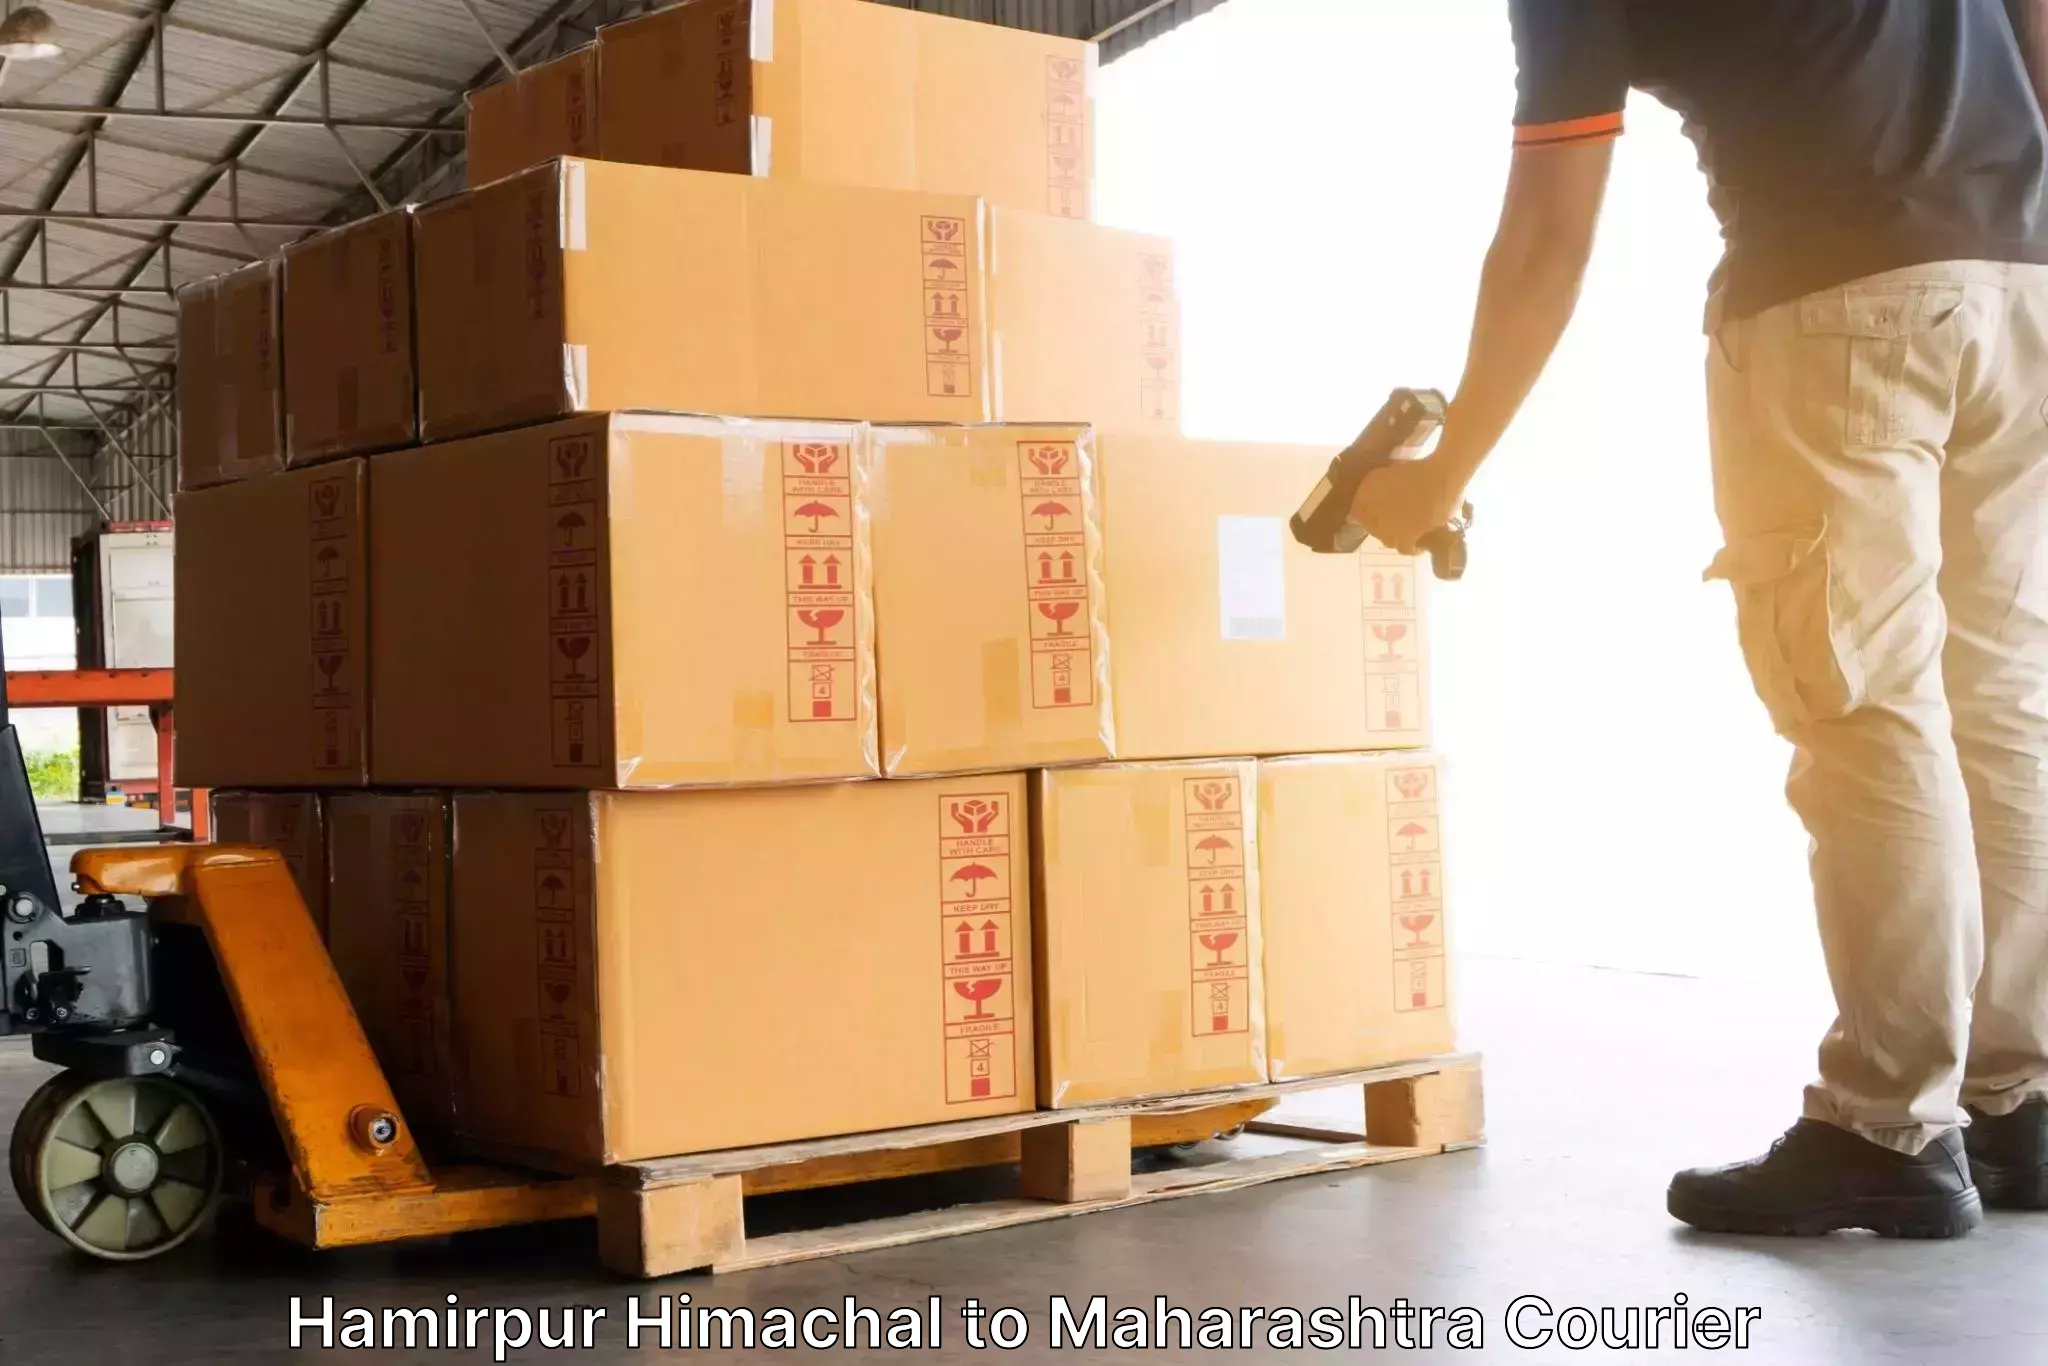 Supply chain delivery Hamirpur Himachal to Mumbai Port